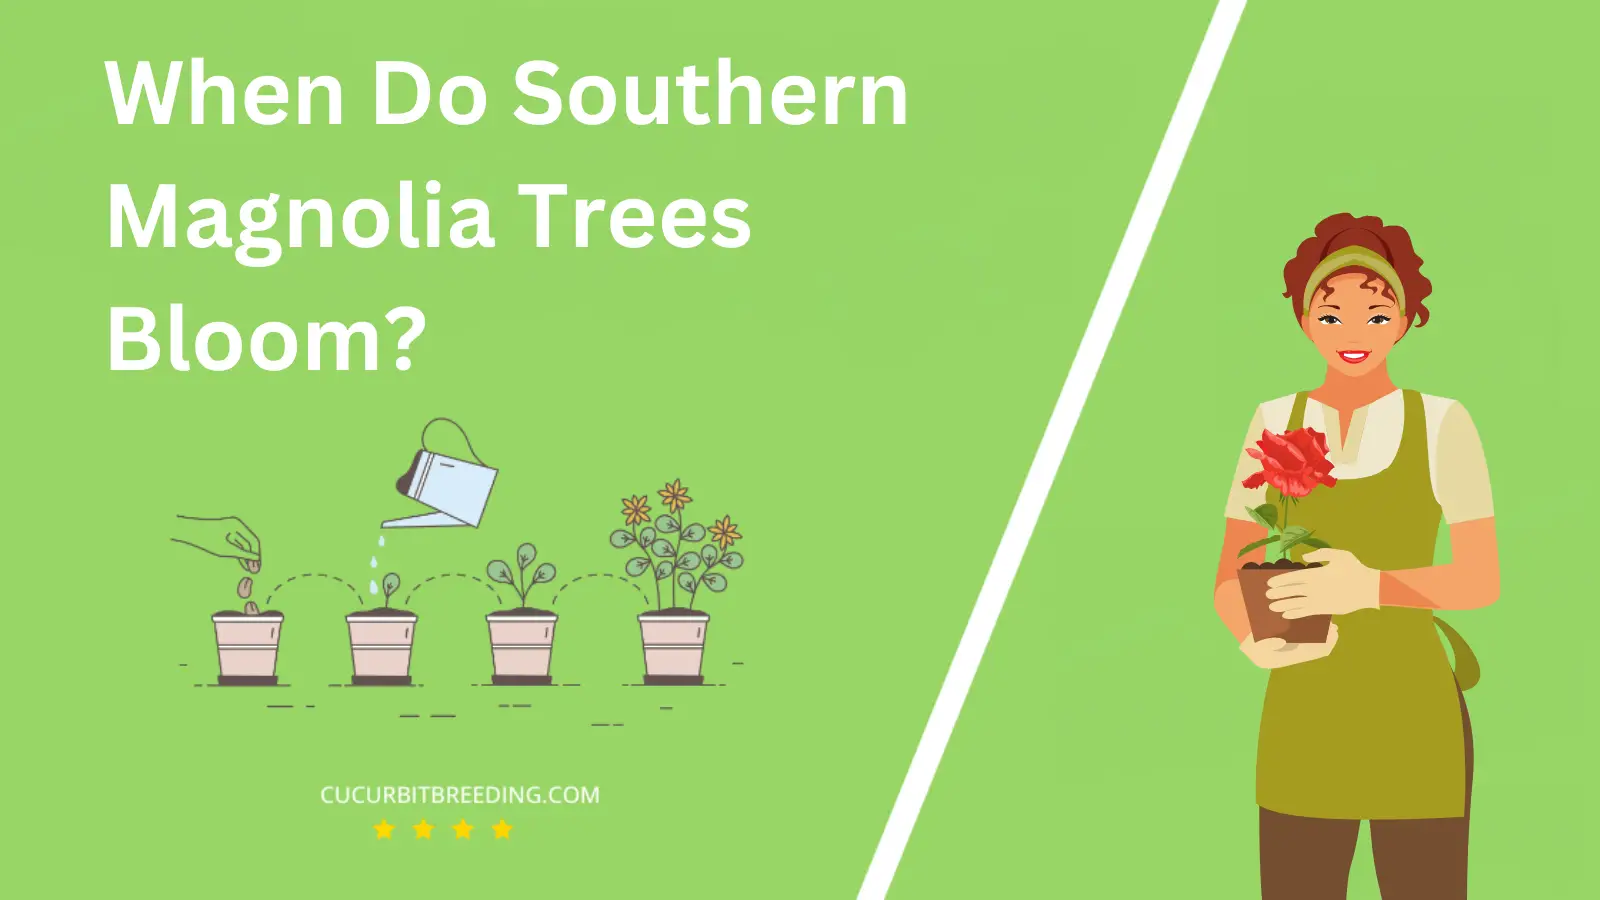 When Do Southern Magnolia Trees Bloom?